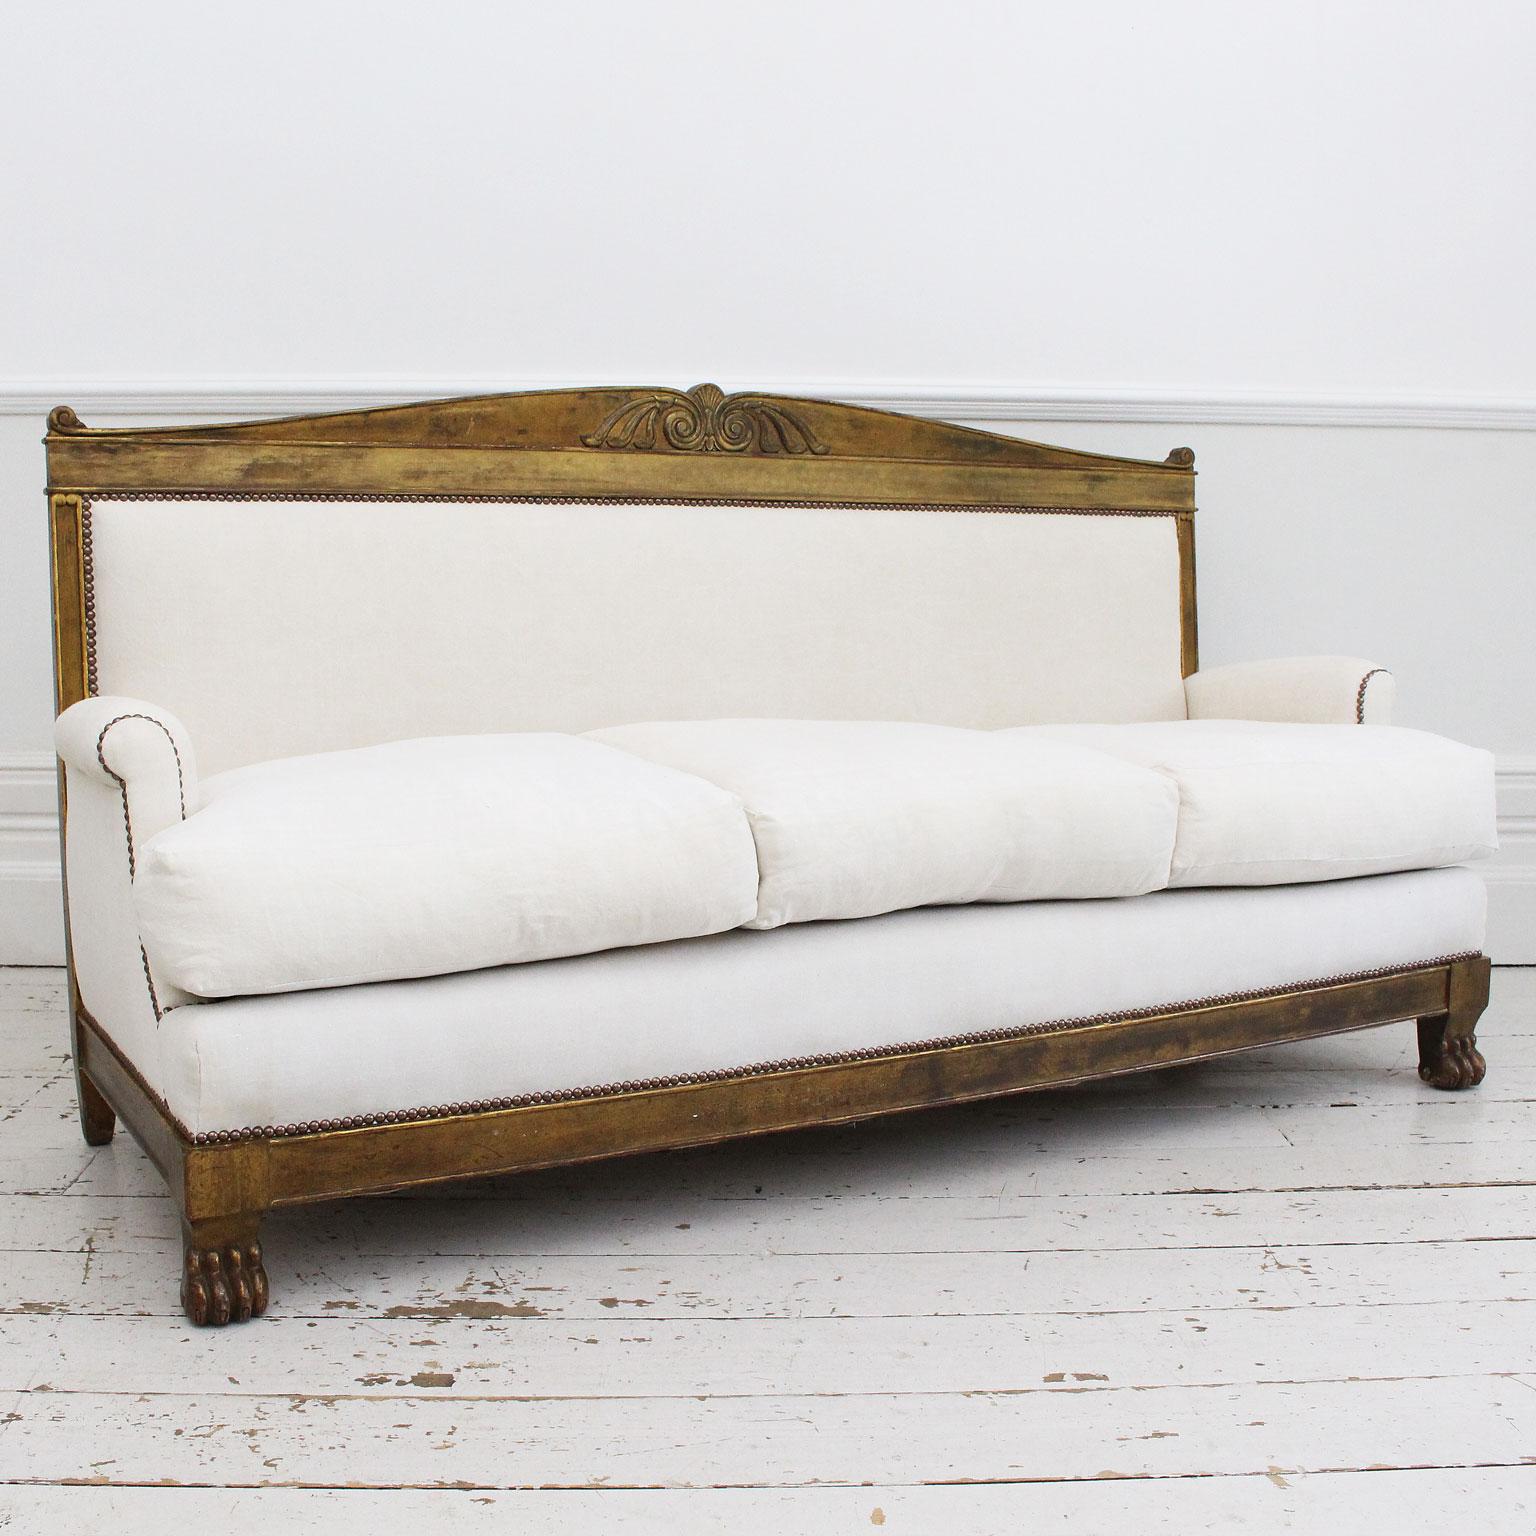 Empire Revival French Empire Style Late 19th Century Gilt Sofa